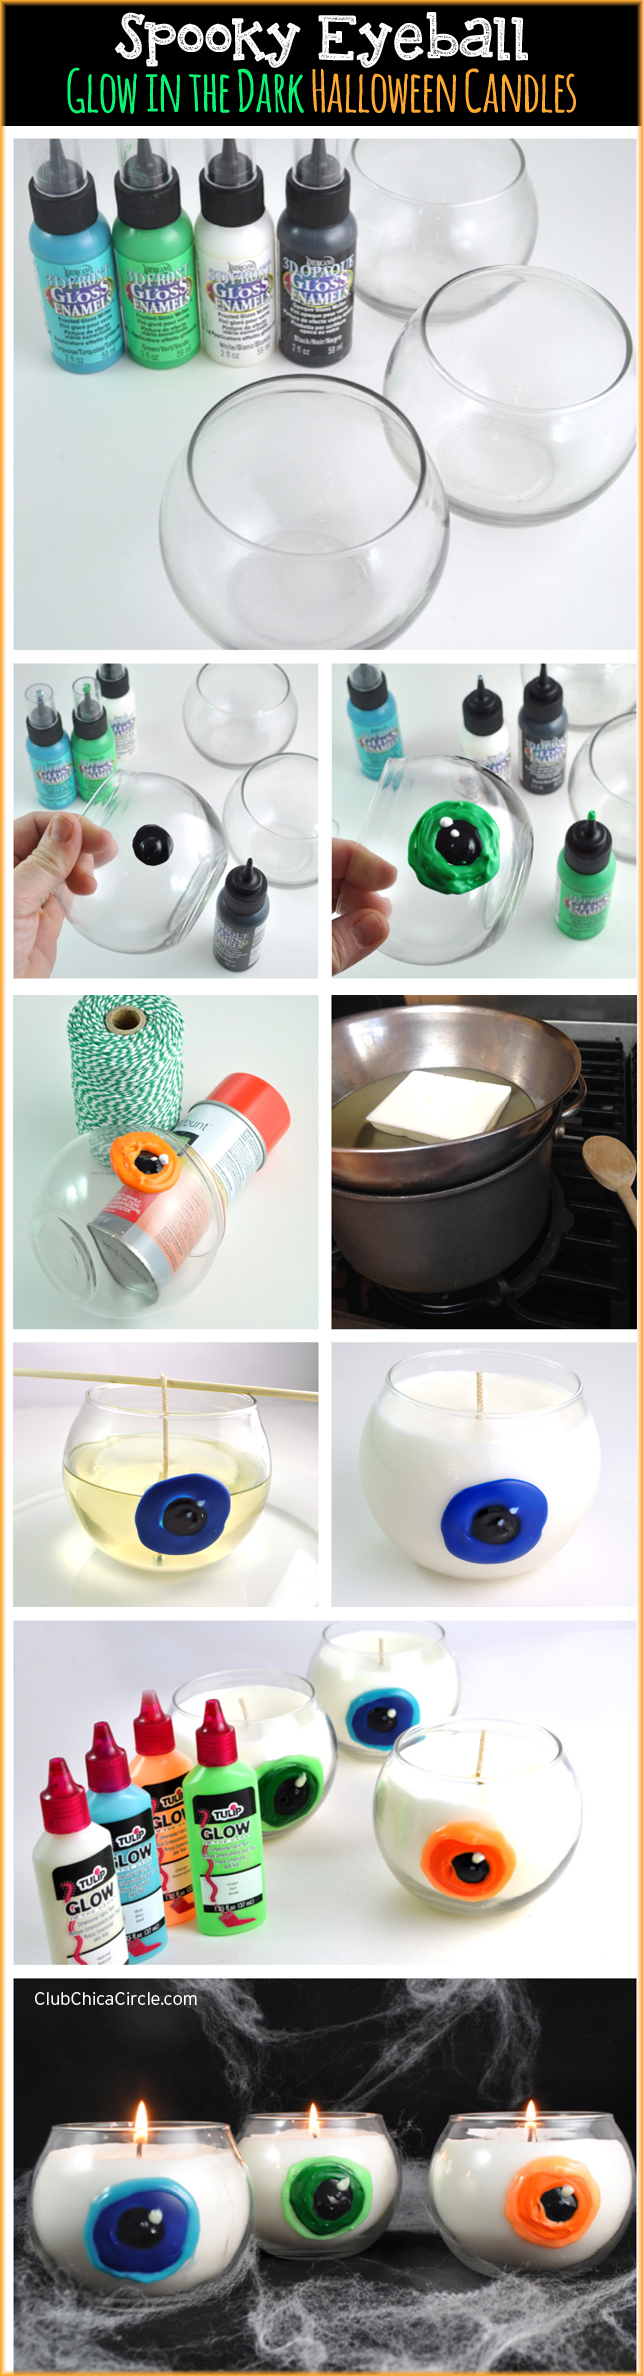 How to Make Spooky Glow in the Dark Halloween Candles